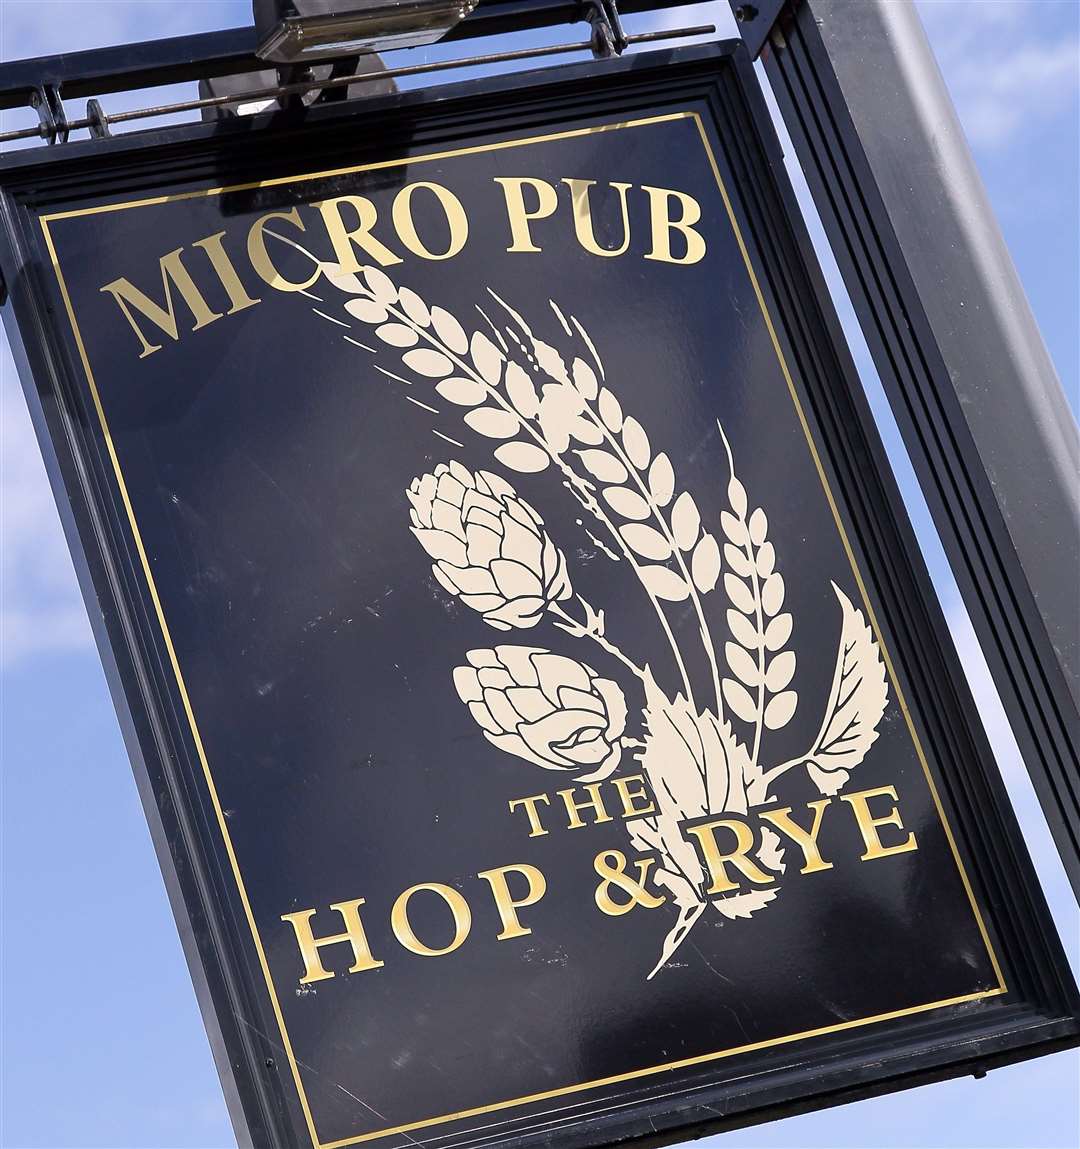 The Hop & Rye will open again under a new landlord